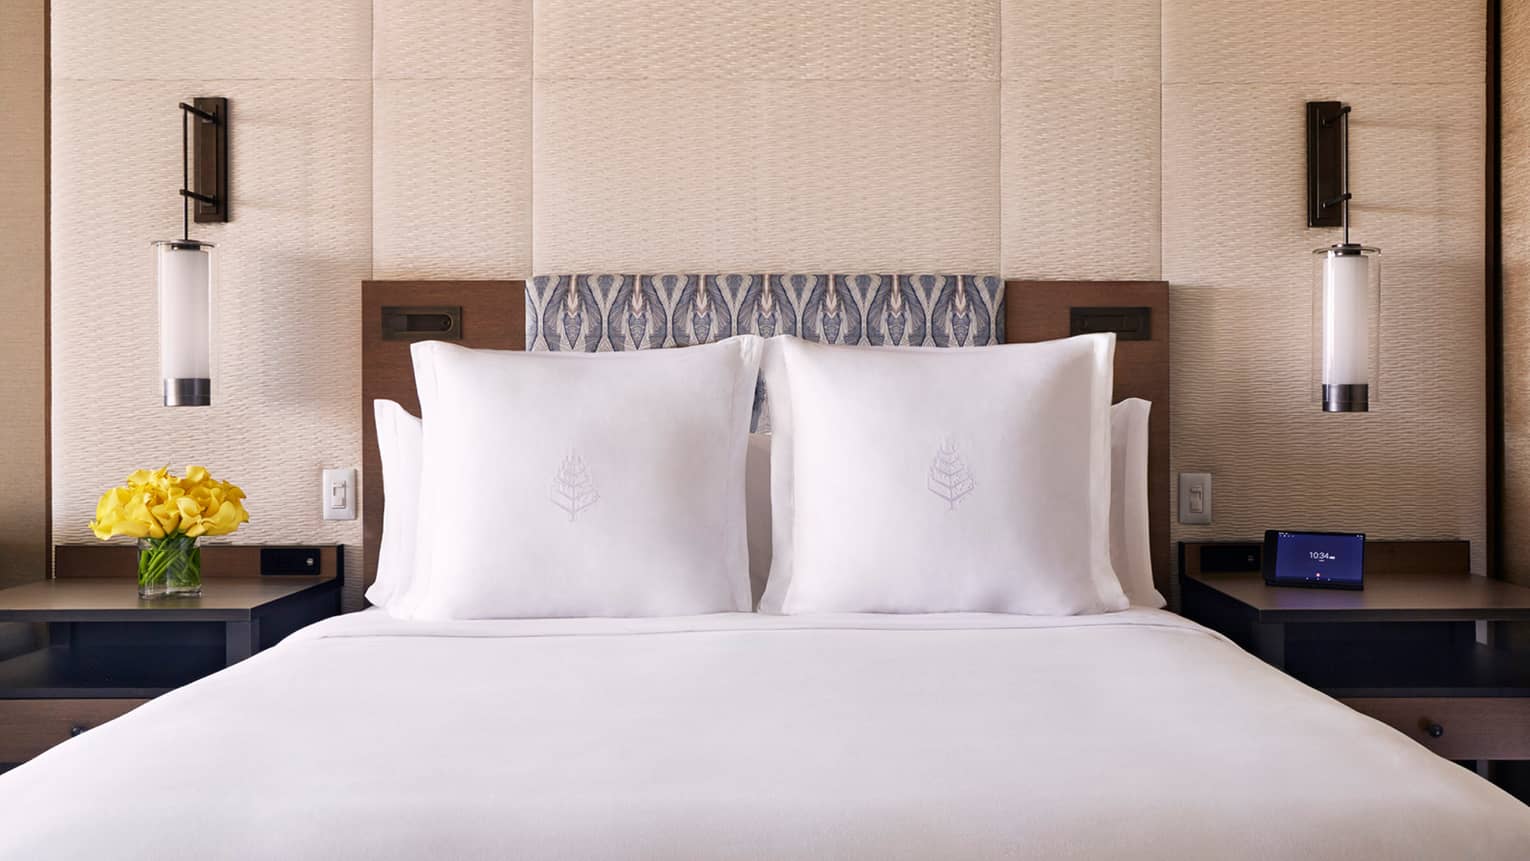 Partial Ocean-View room bed with white pillows with Four Seasons logo, wood headboard, wall panel